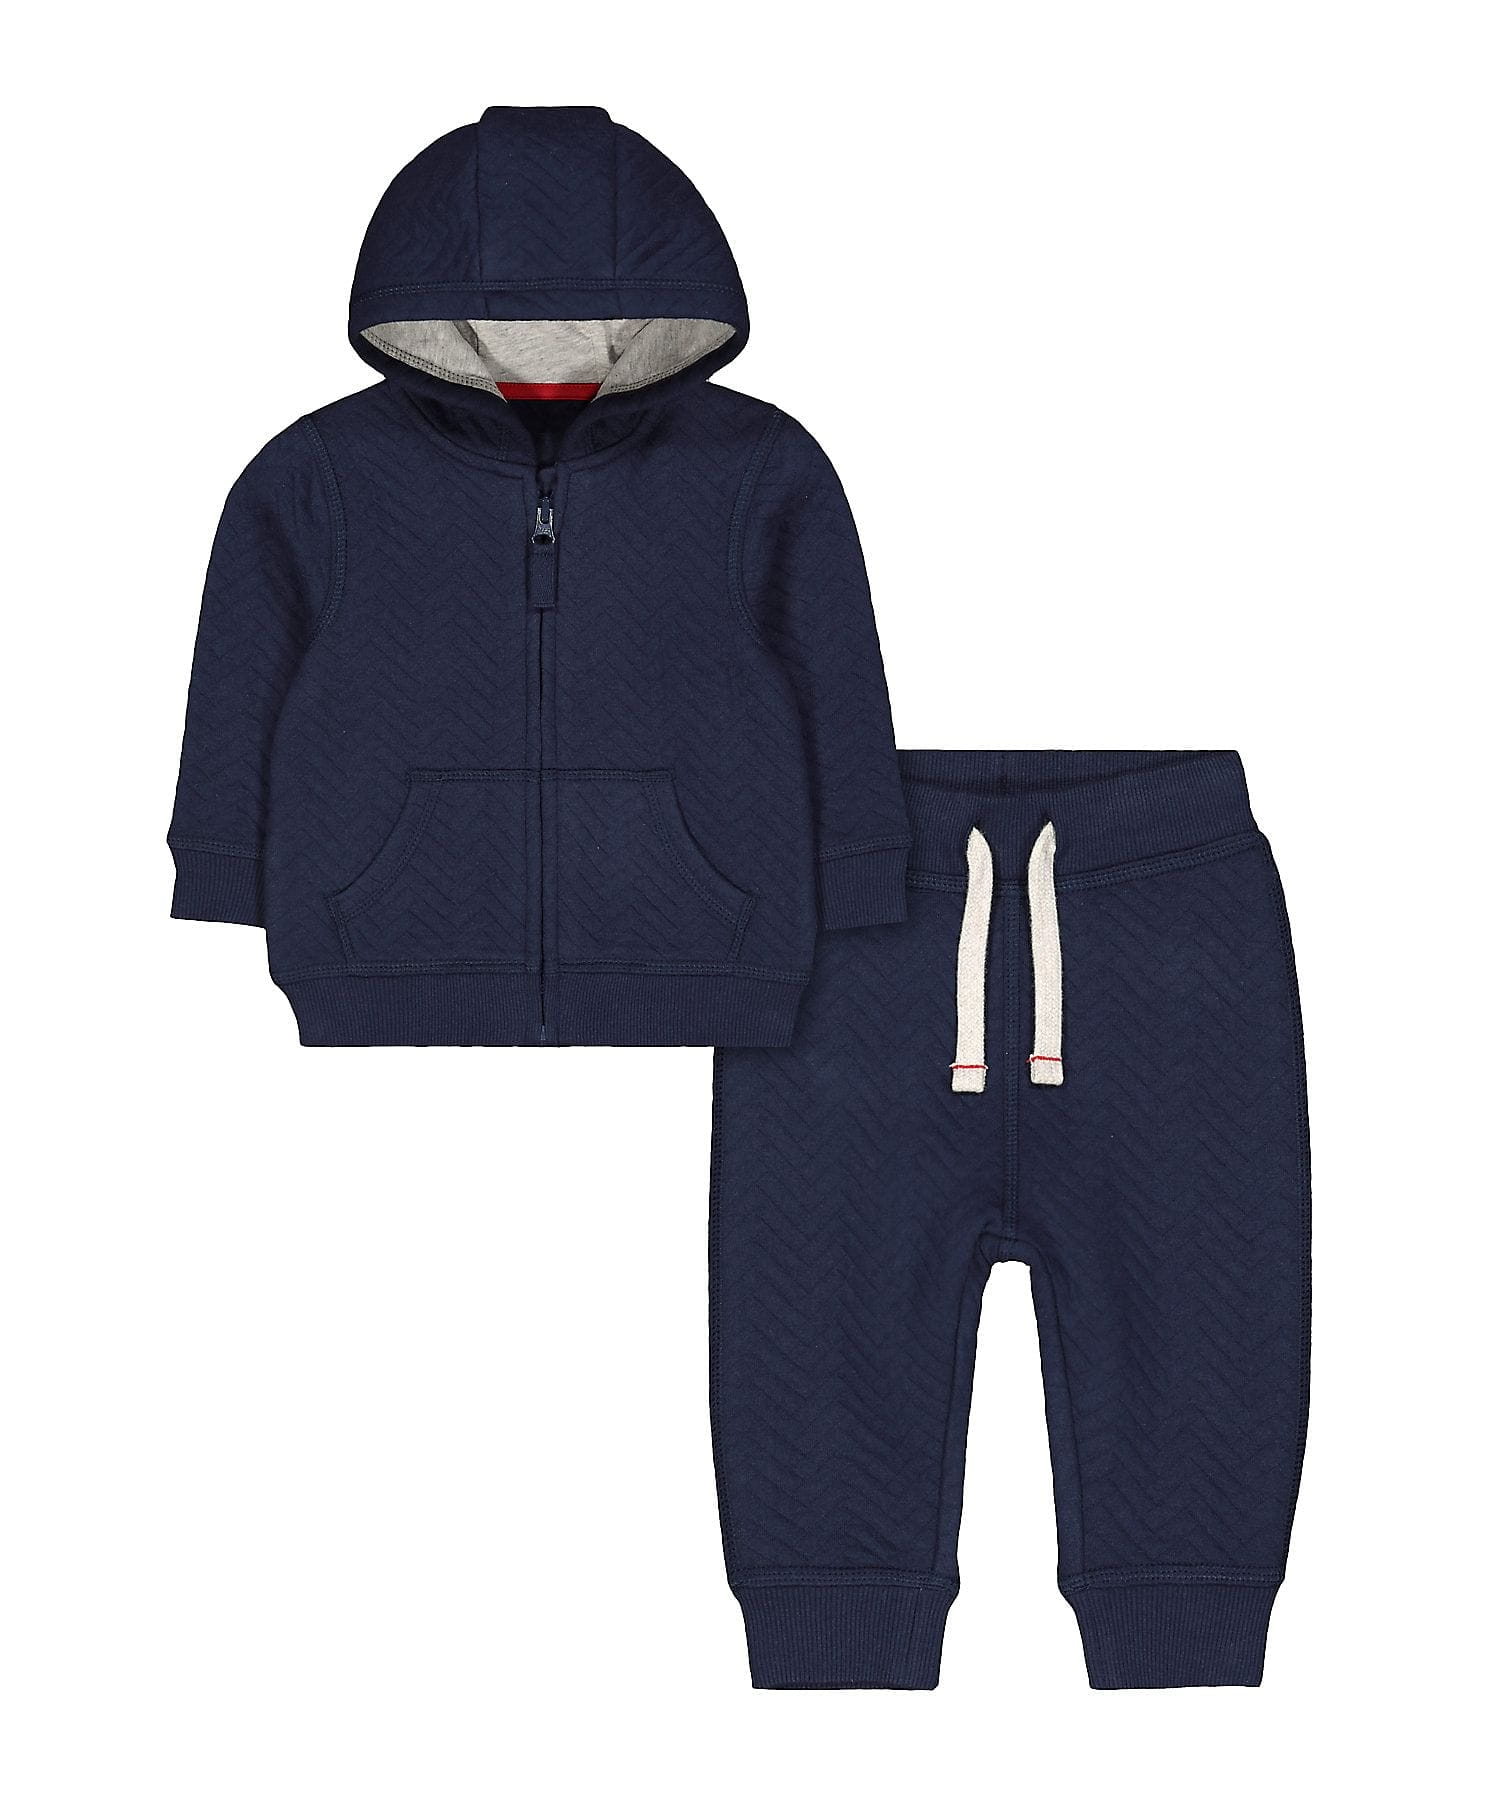 Mothercare | Boys Full Sleeves Hooded Jog Set Quilted - Navy 0